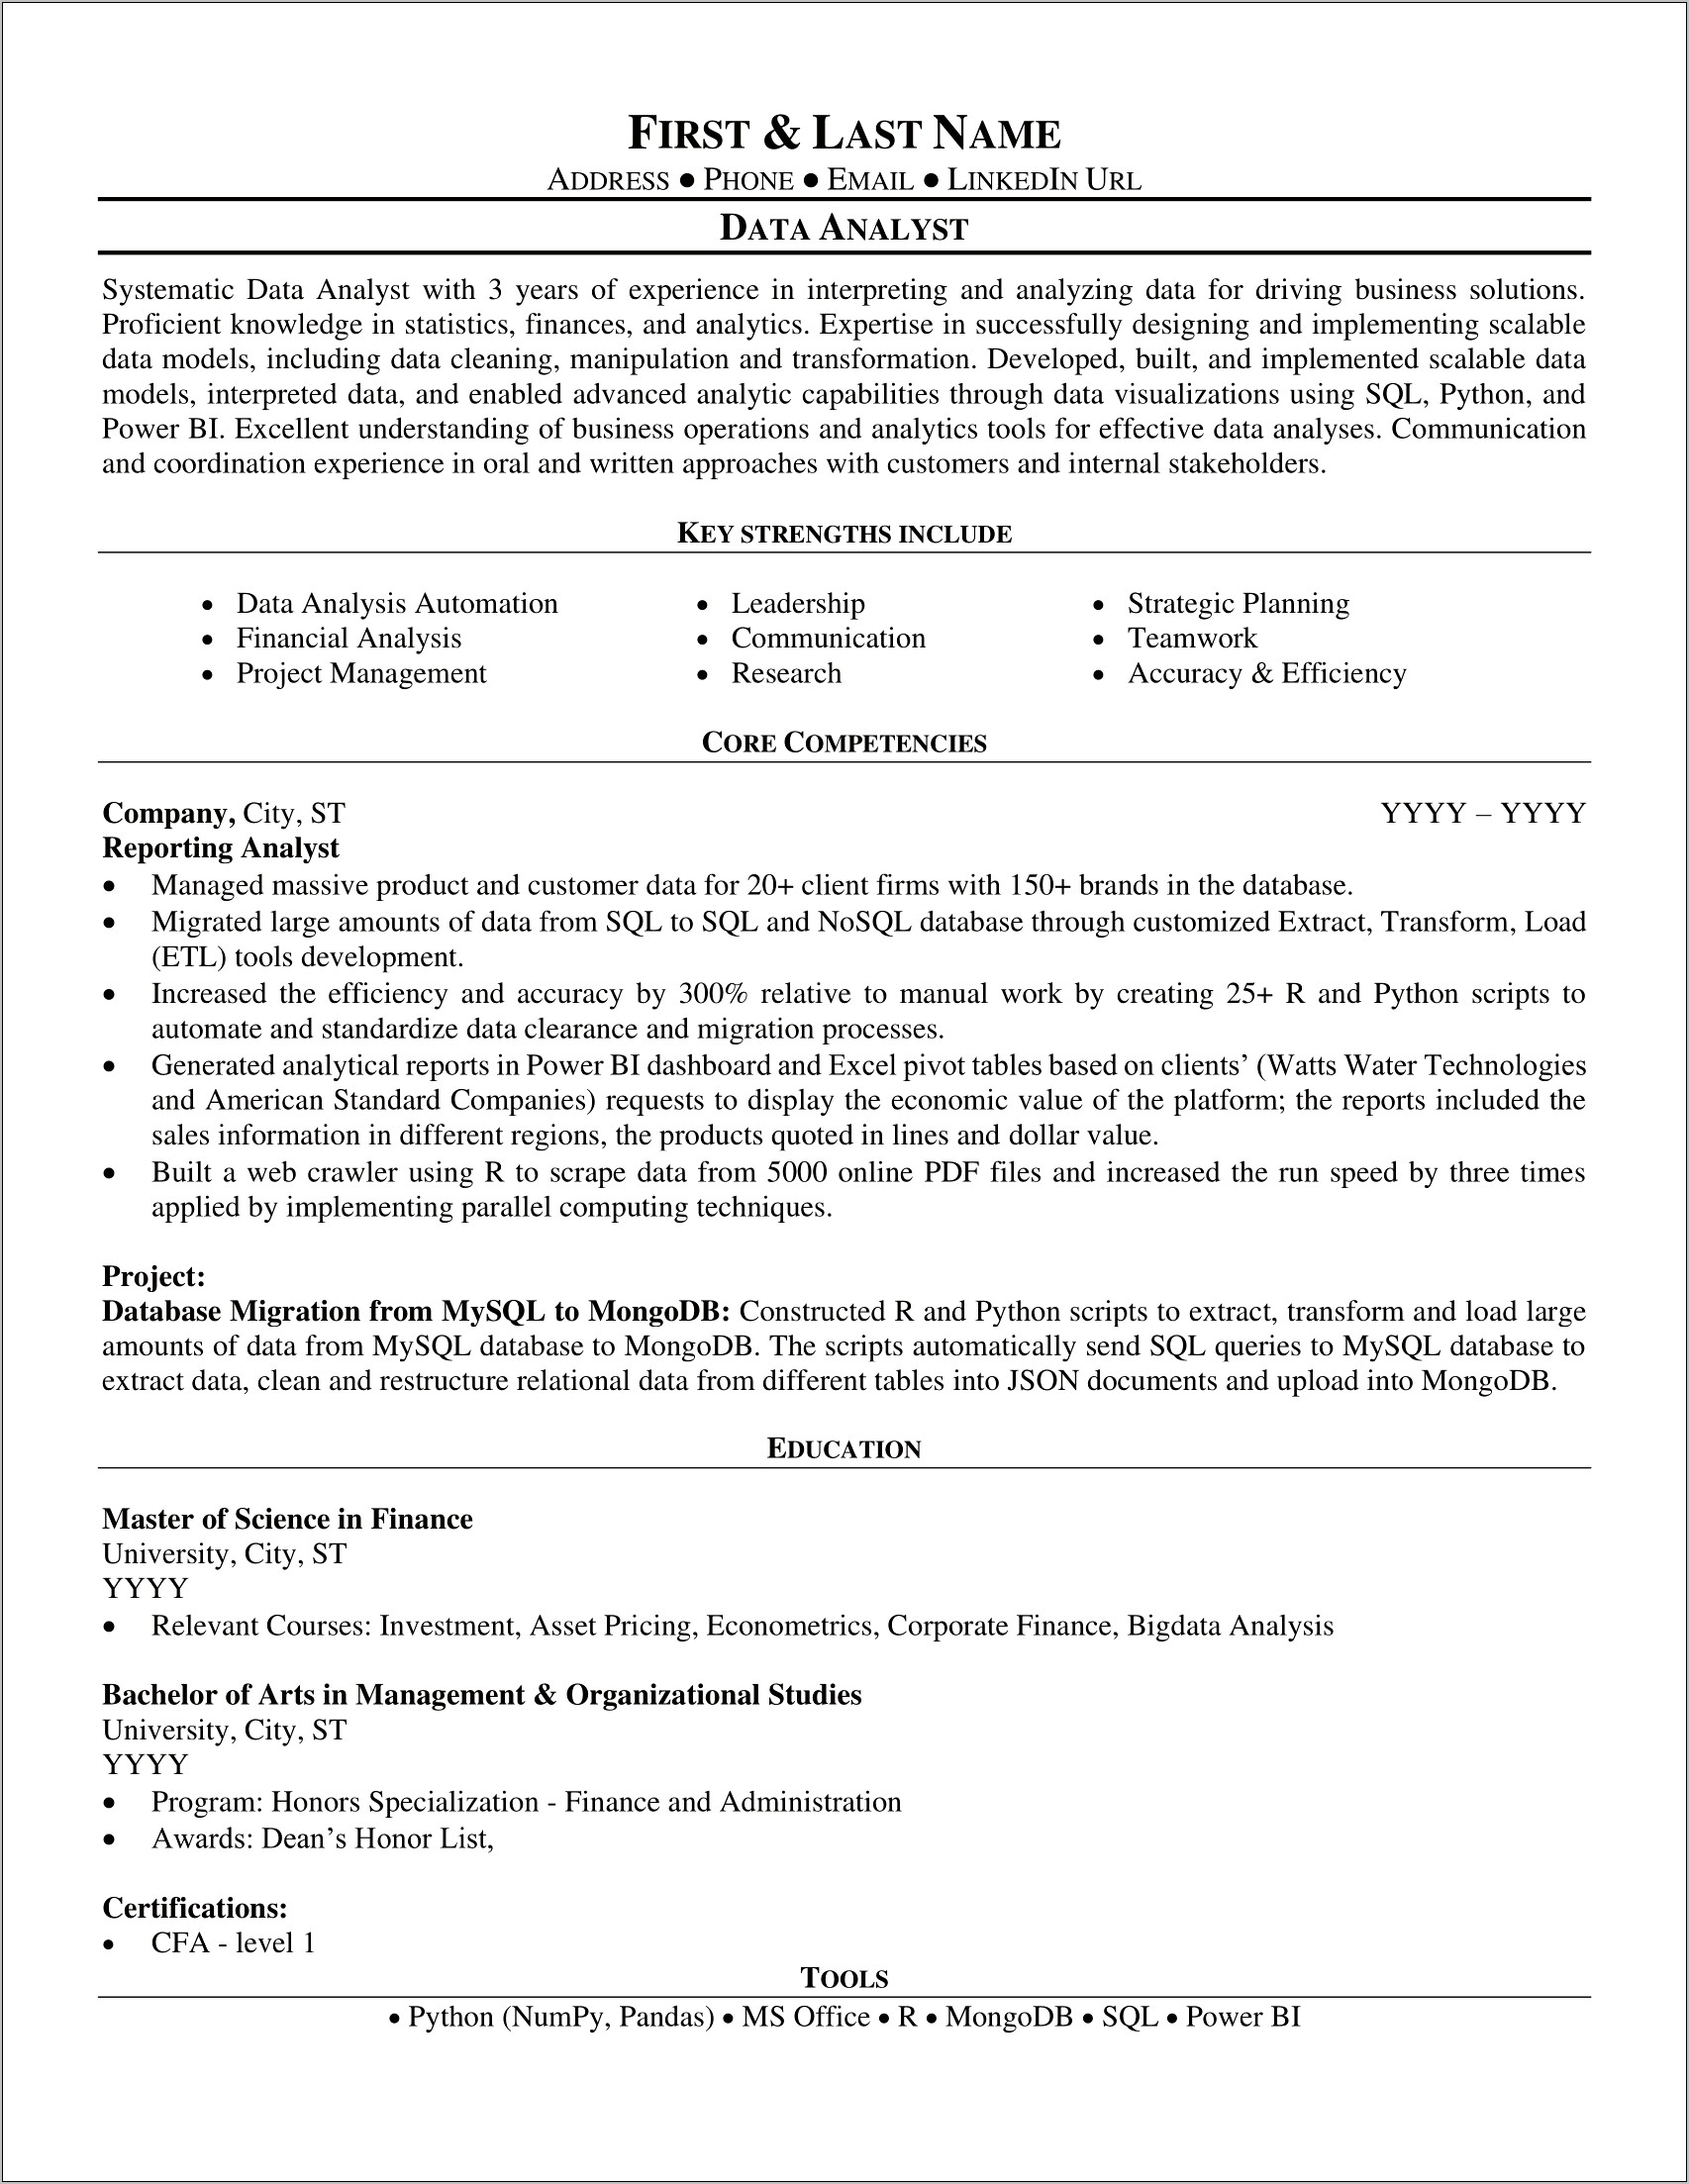 Sample Resume For A Data Analyst